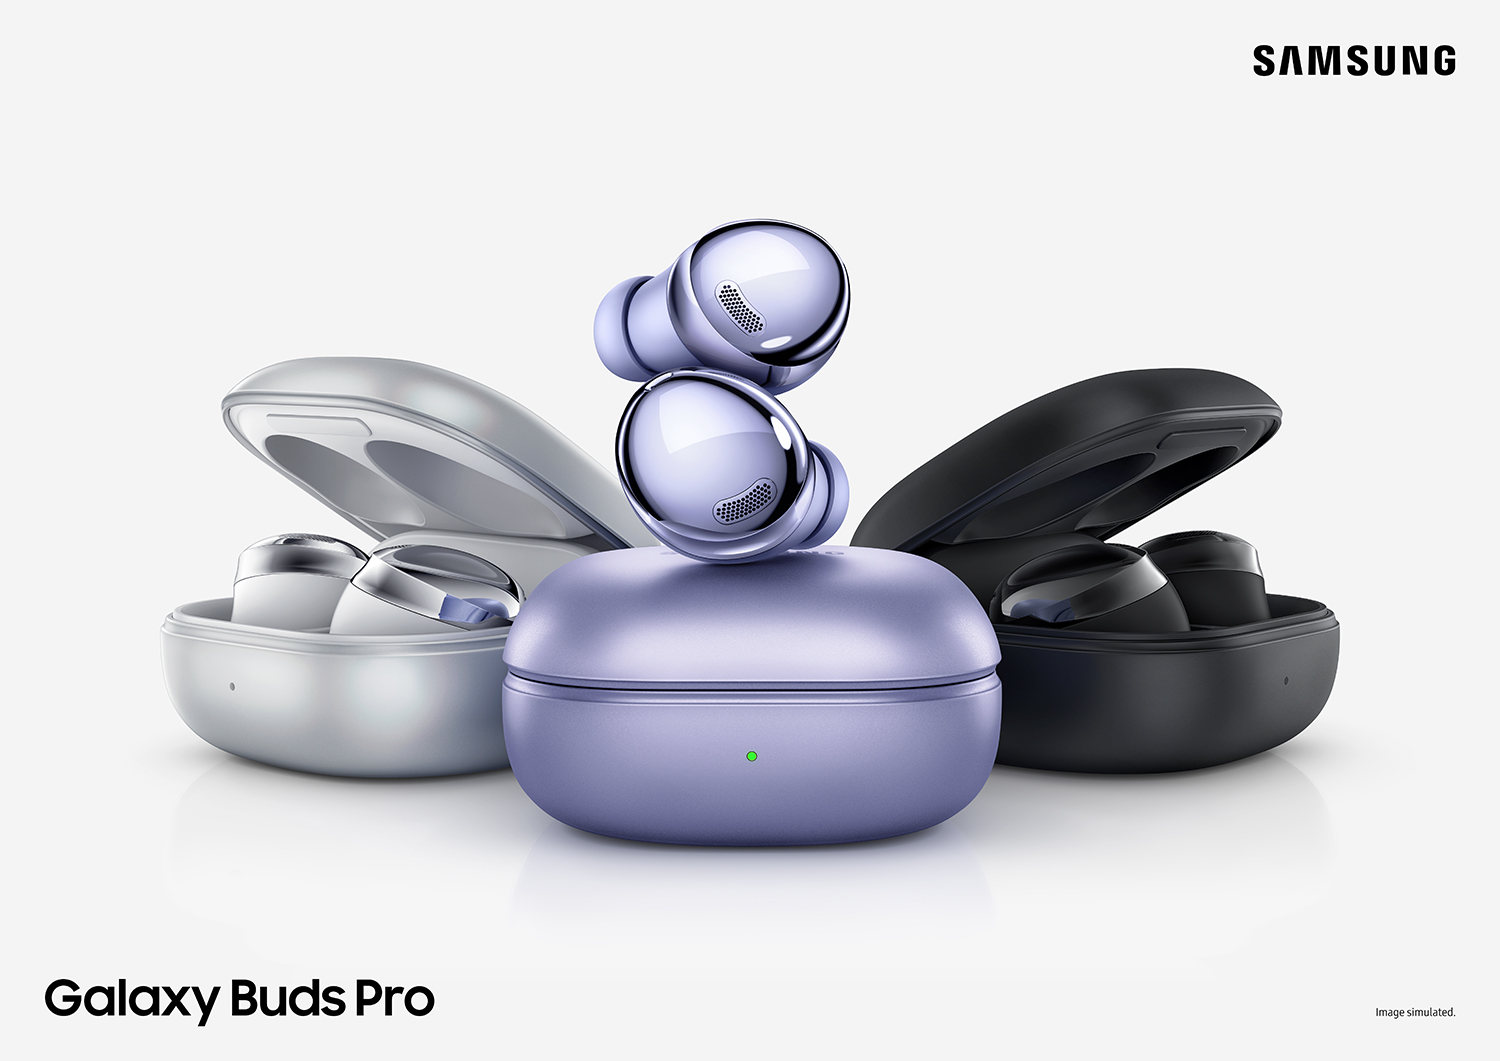 Galaxy Buds Pro black single key visual with two ear buds atop charging case